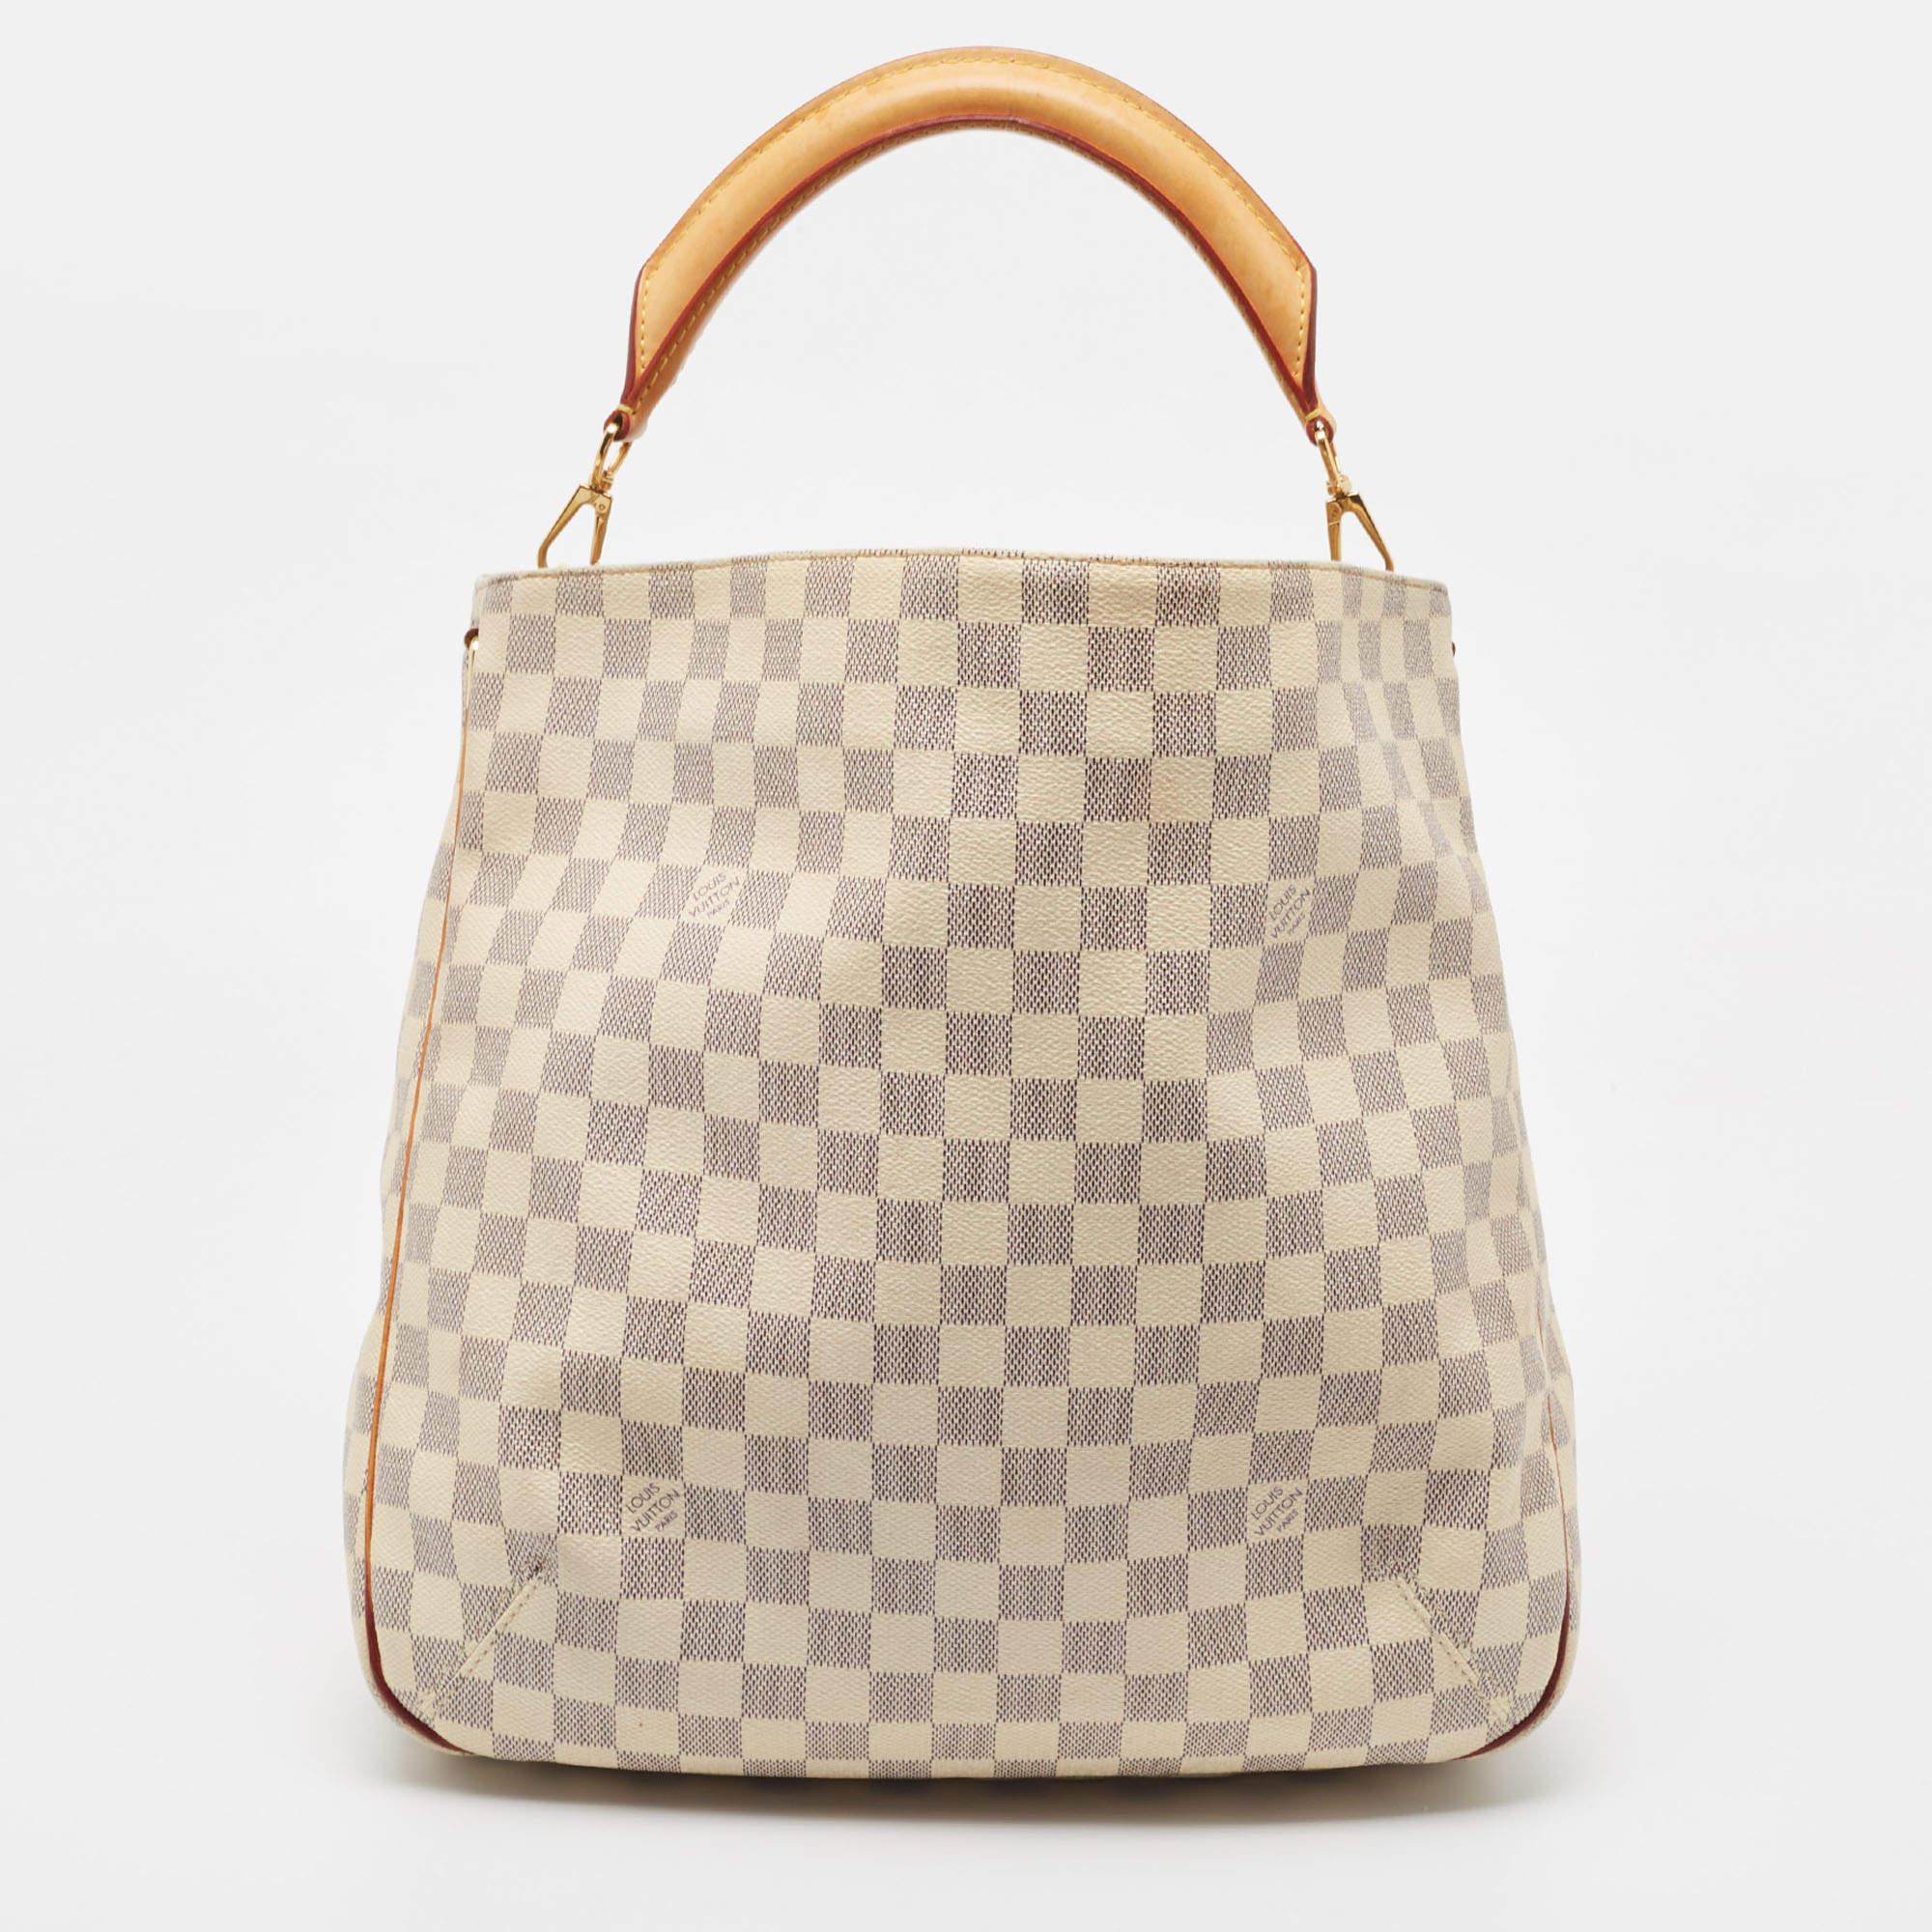 This Soffi bag from the House of Louis Vuitton is a chic accessory to own. It is crafted using Damier Azur canvas on the exterior and flaunts gold-toned hardware. It features a single handle and a roomy canvas-lined interior. Style this gorgeous LV